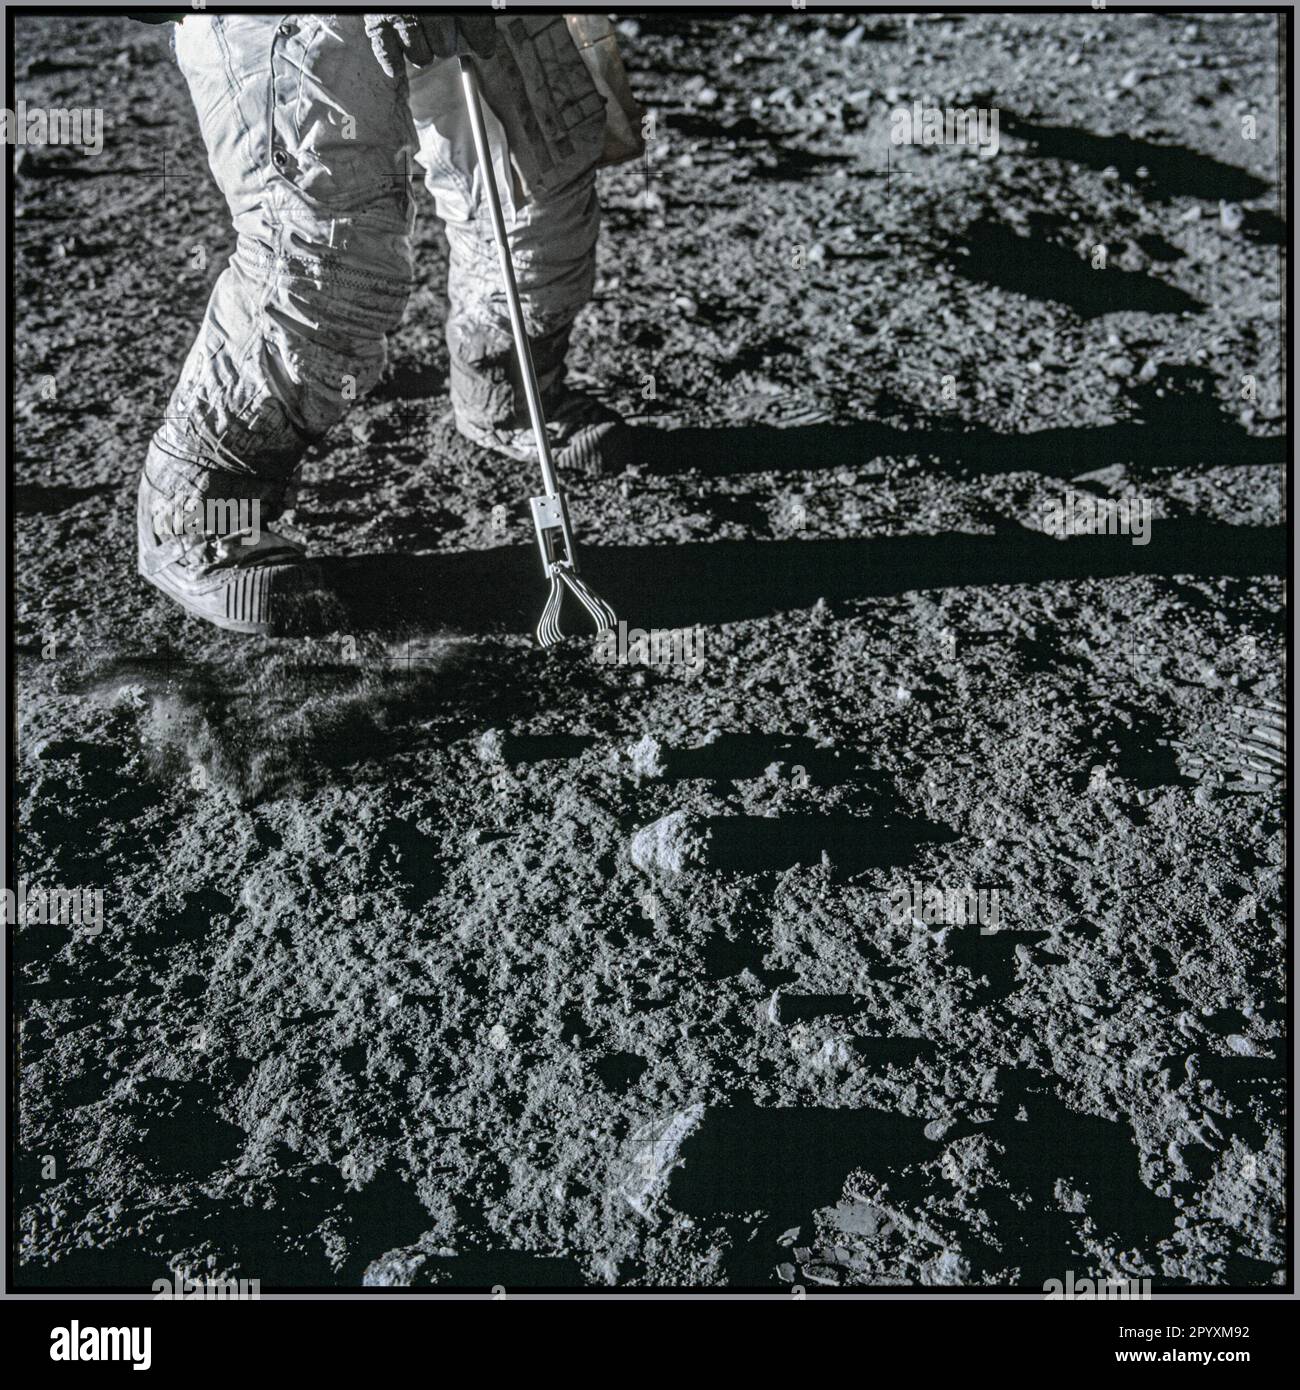 Close-up view of a set of tongs, an Apollo Lunar Hand Tool, being used by Astronaut Charles Conrad Jr., to pick up lunar samples during the Apollo XII mission, November 19, 1969. Date 19 November 1969 Stock Photo